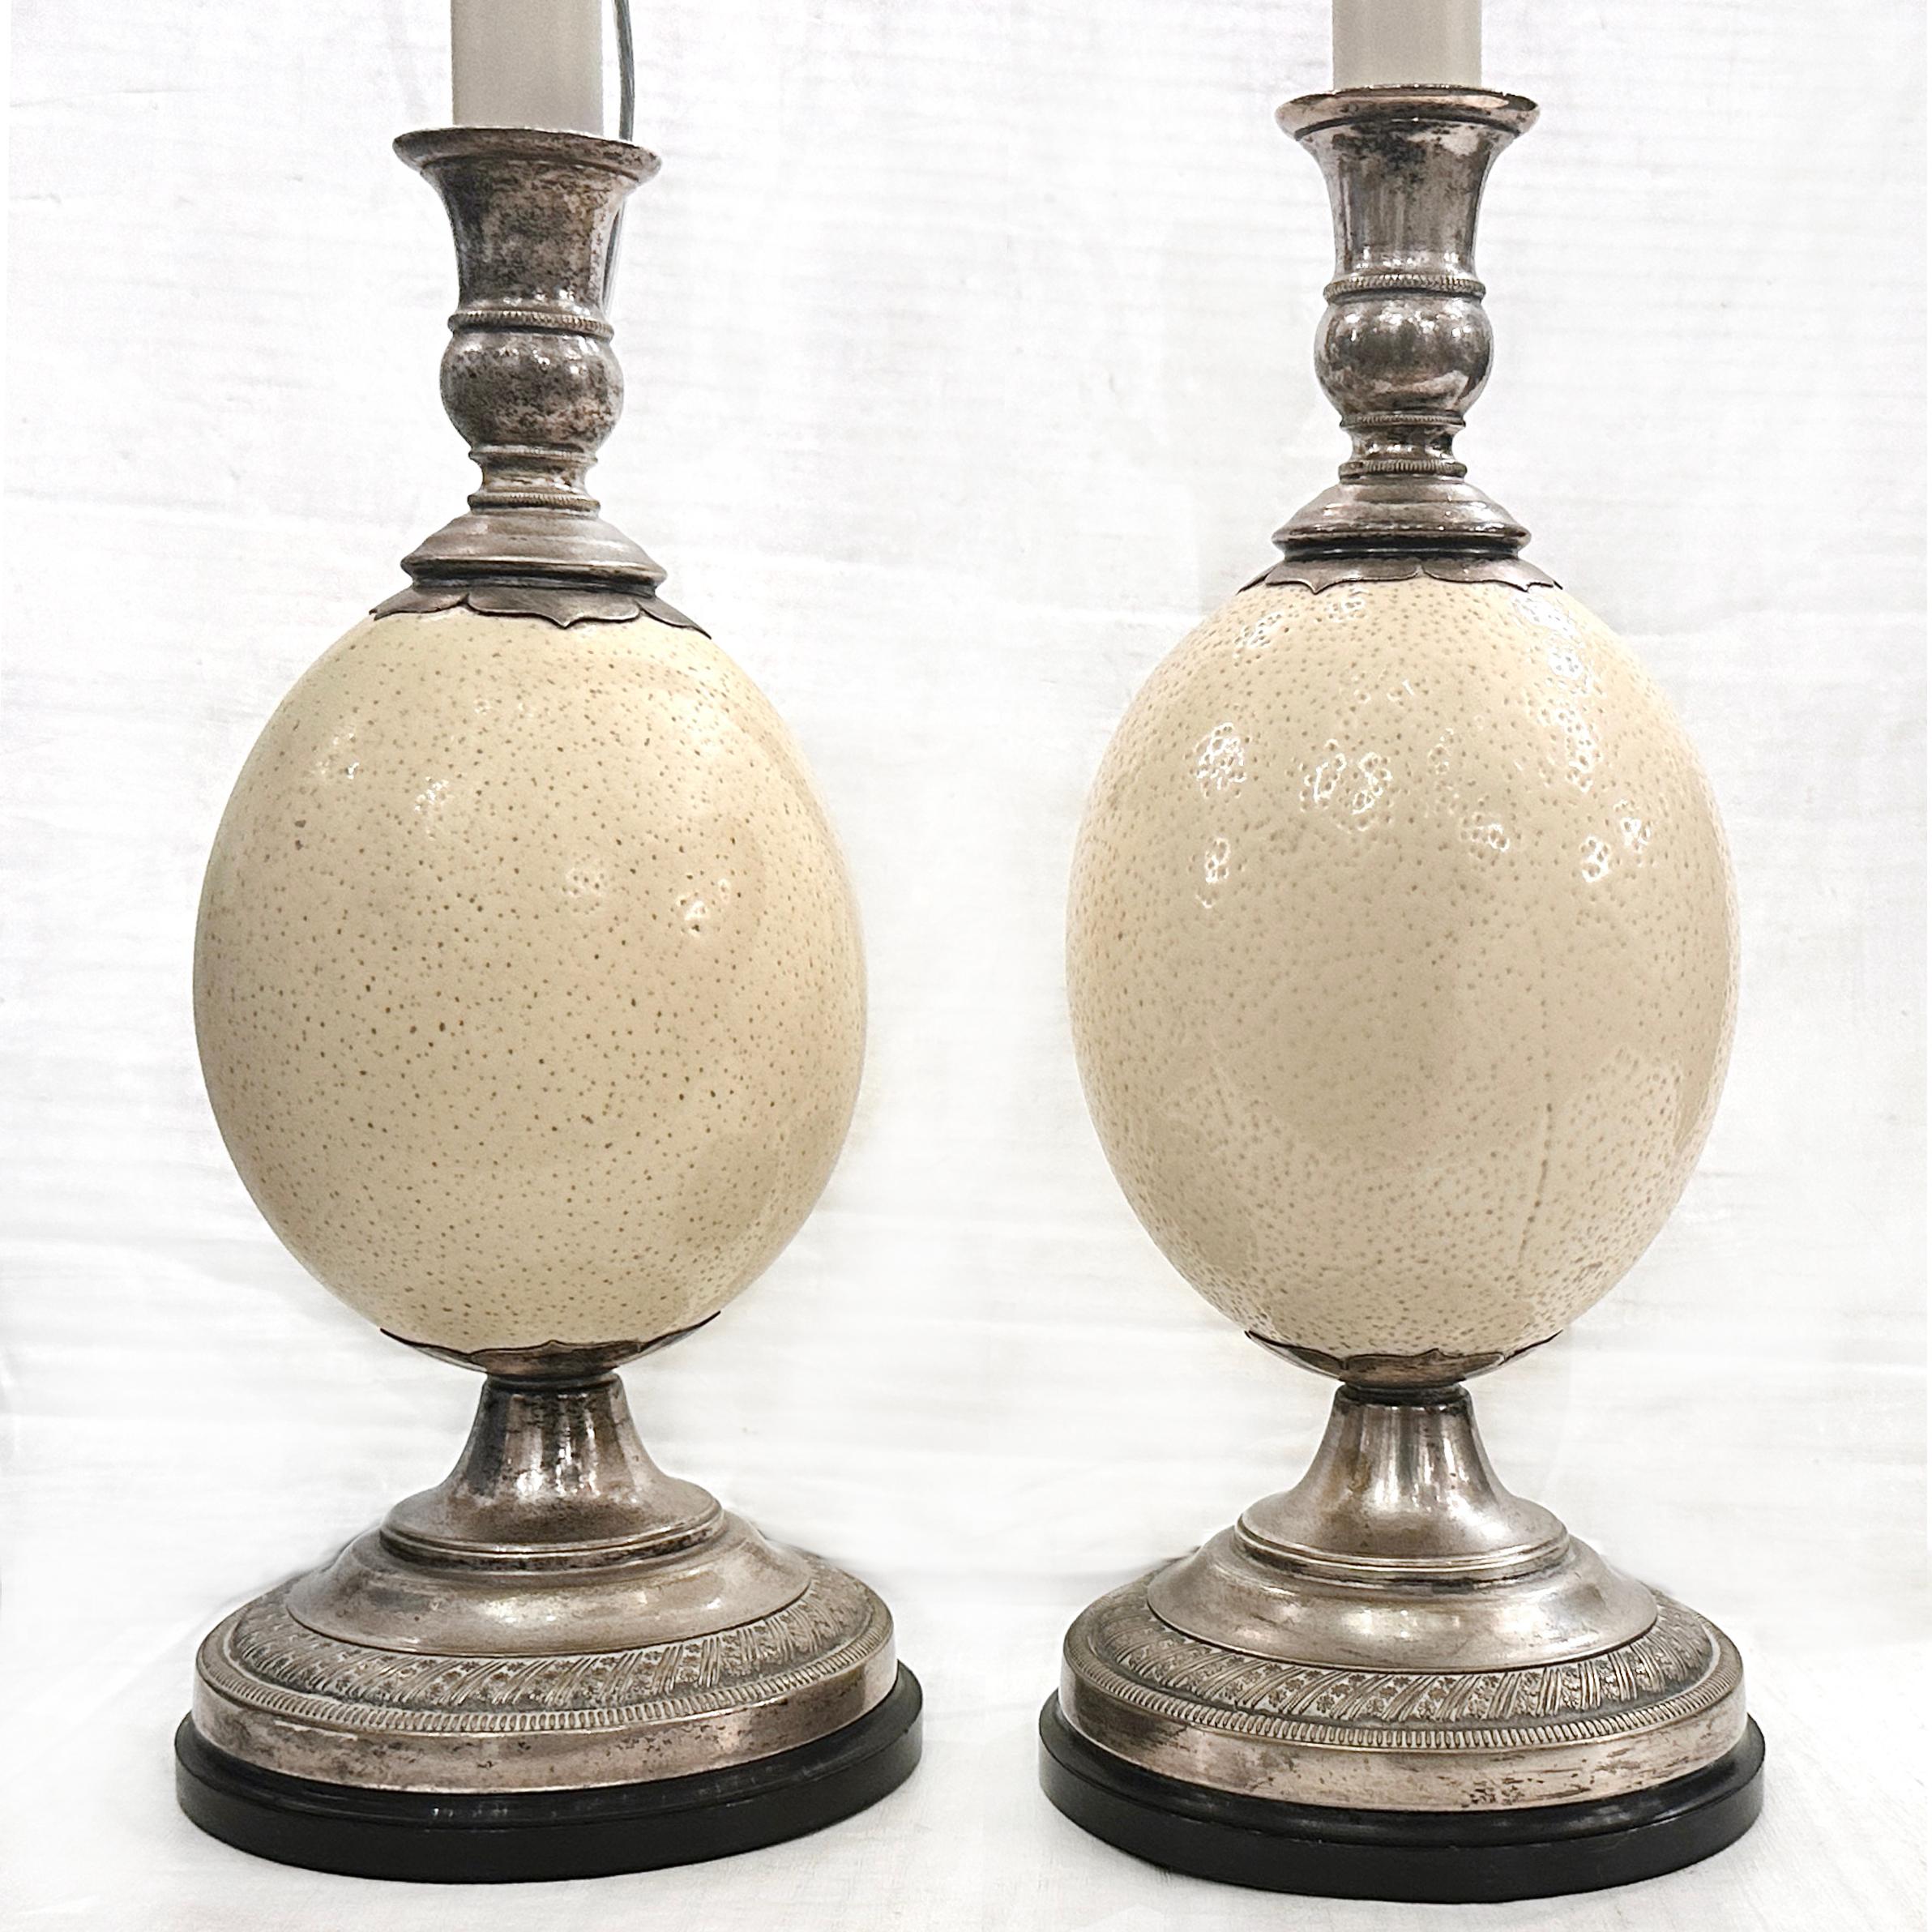 Pair of circa 1950's English silver plated lamp with ostrich egg body.

Measurements:
Height of body: 12